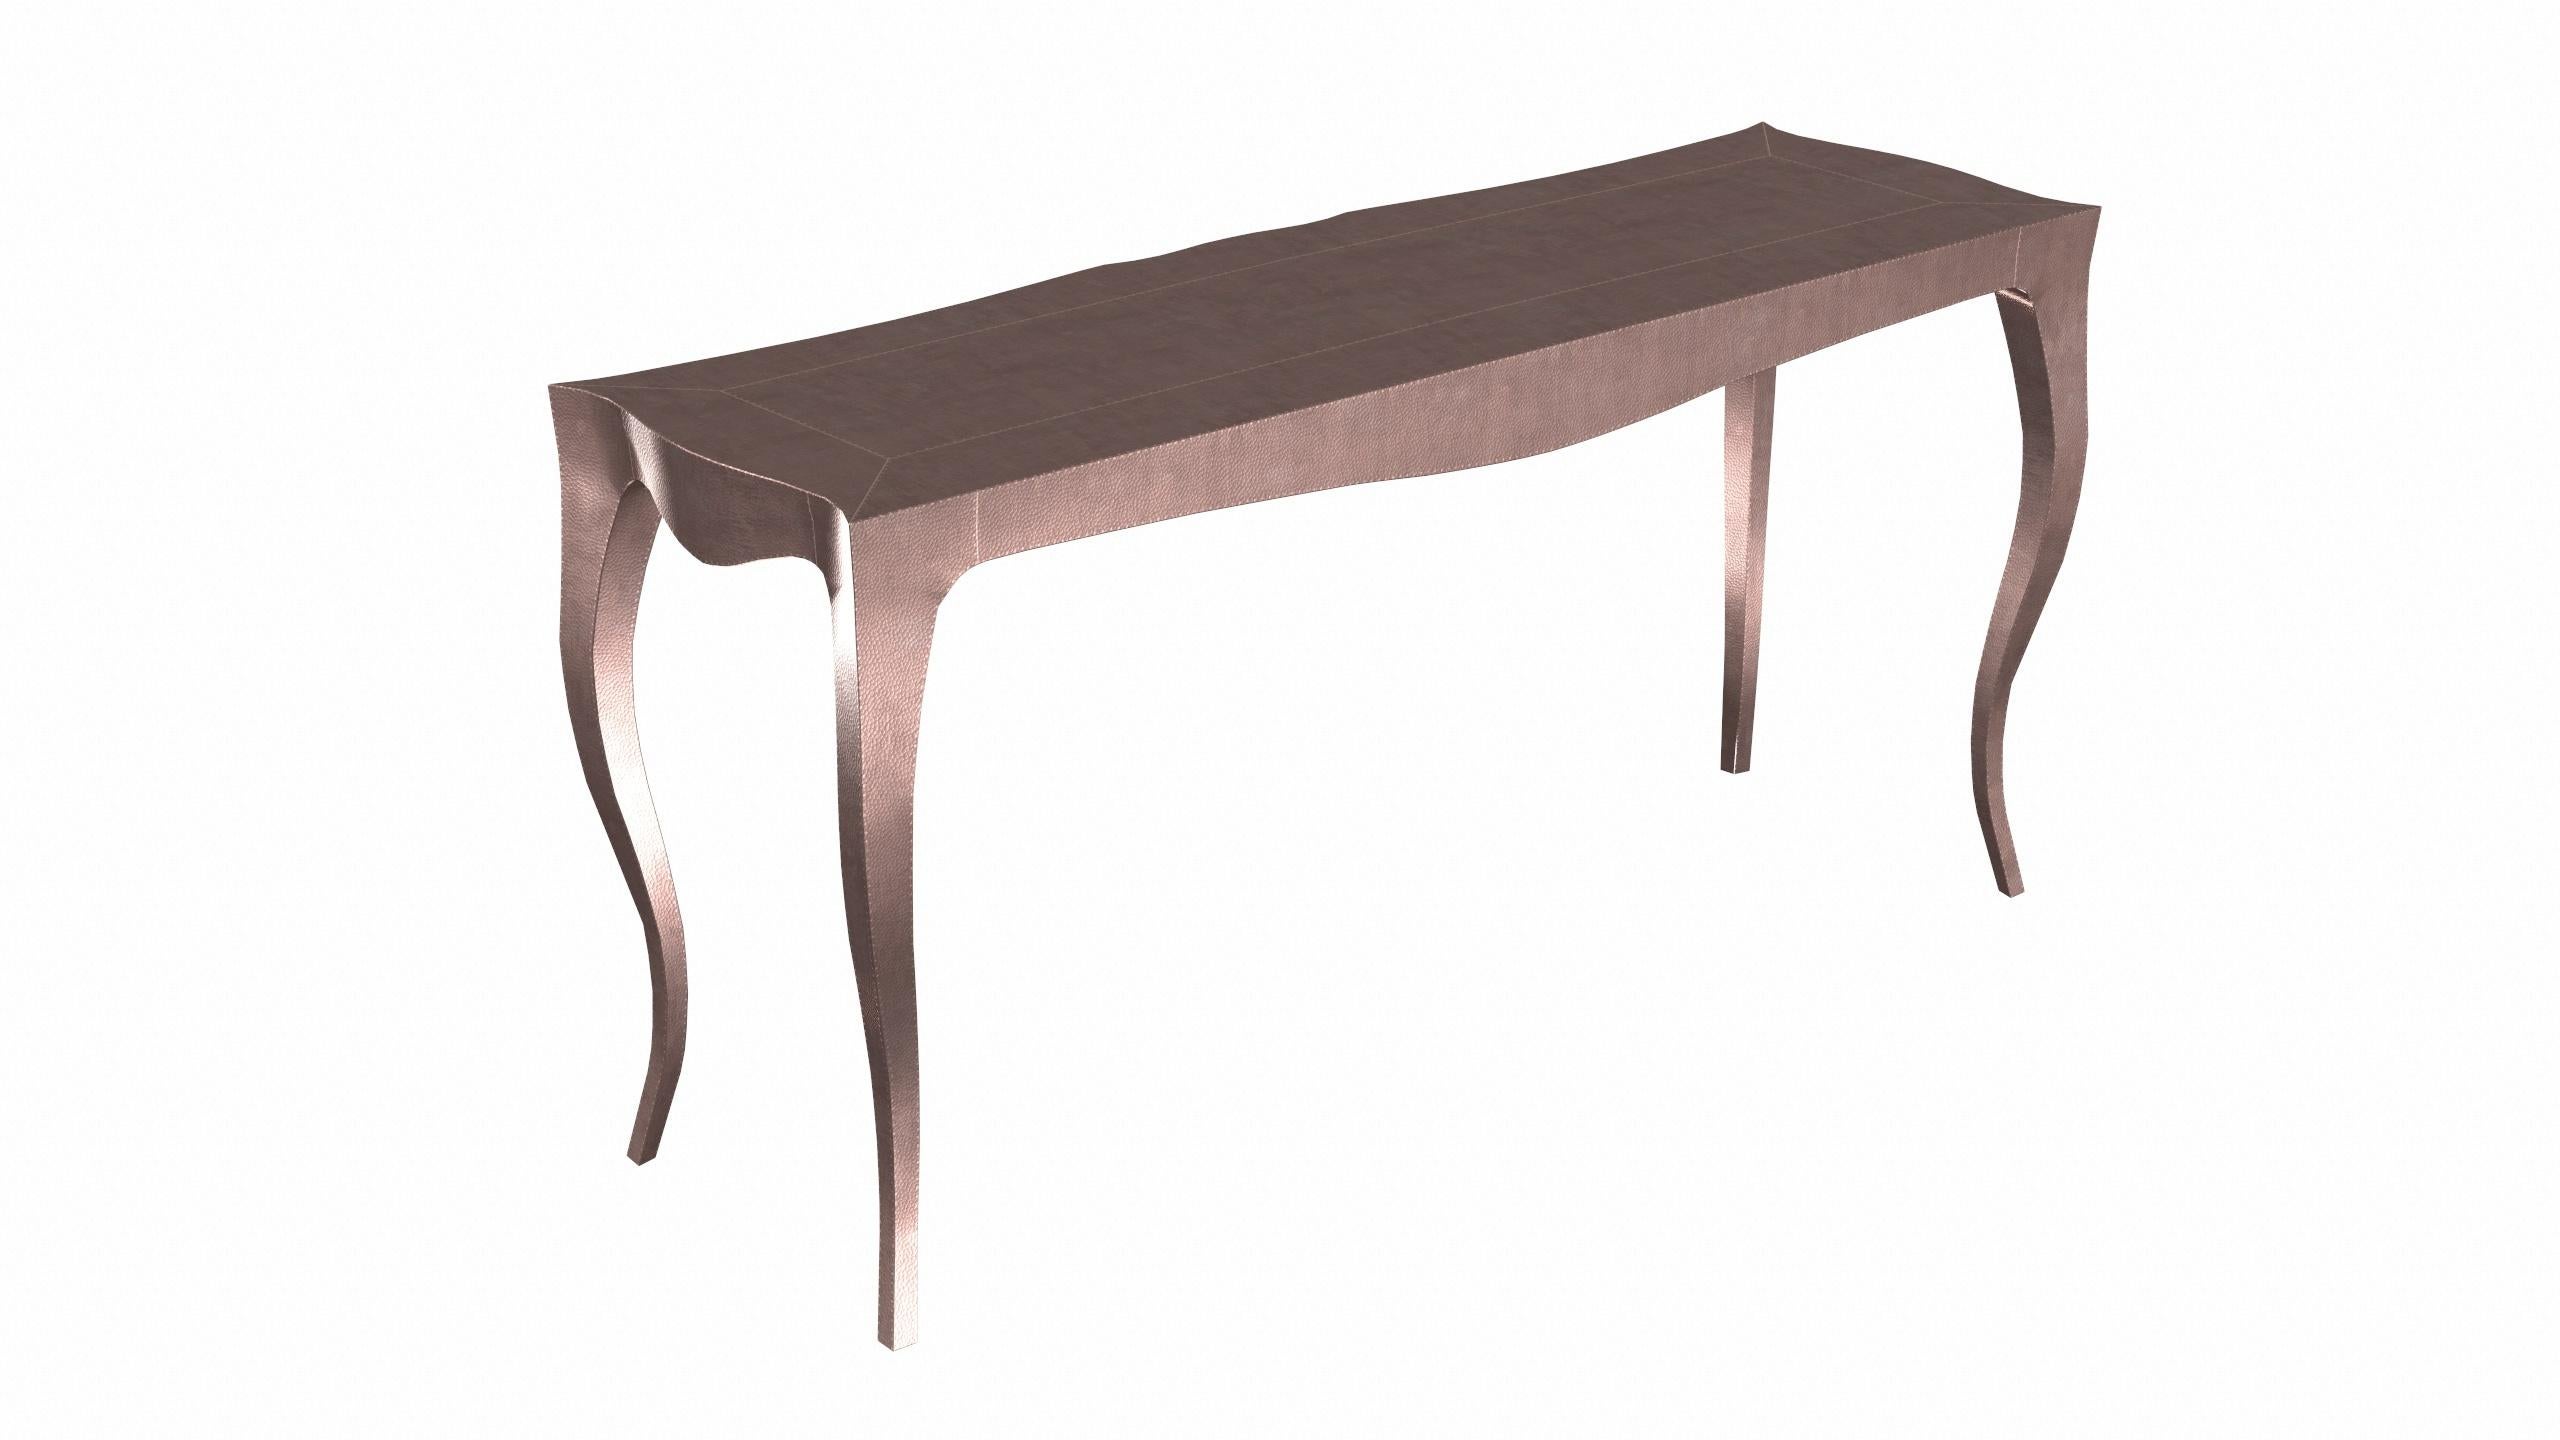 Metal Louise Console Art Deco Card and Tea Tables Mid. Hammered Copper by Paul Mathieu For Sale